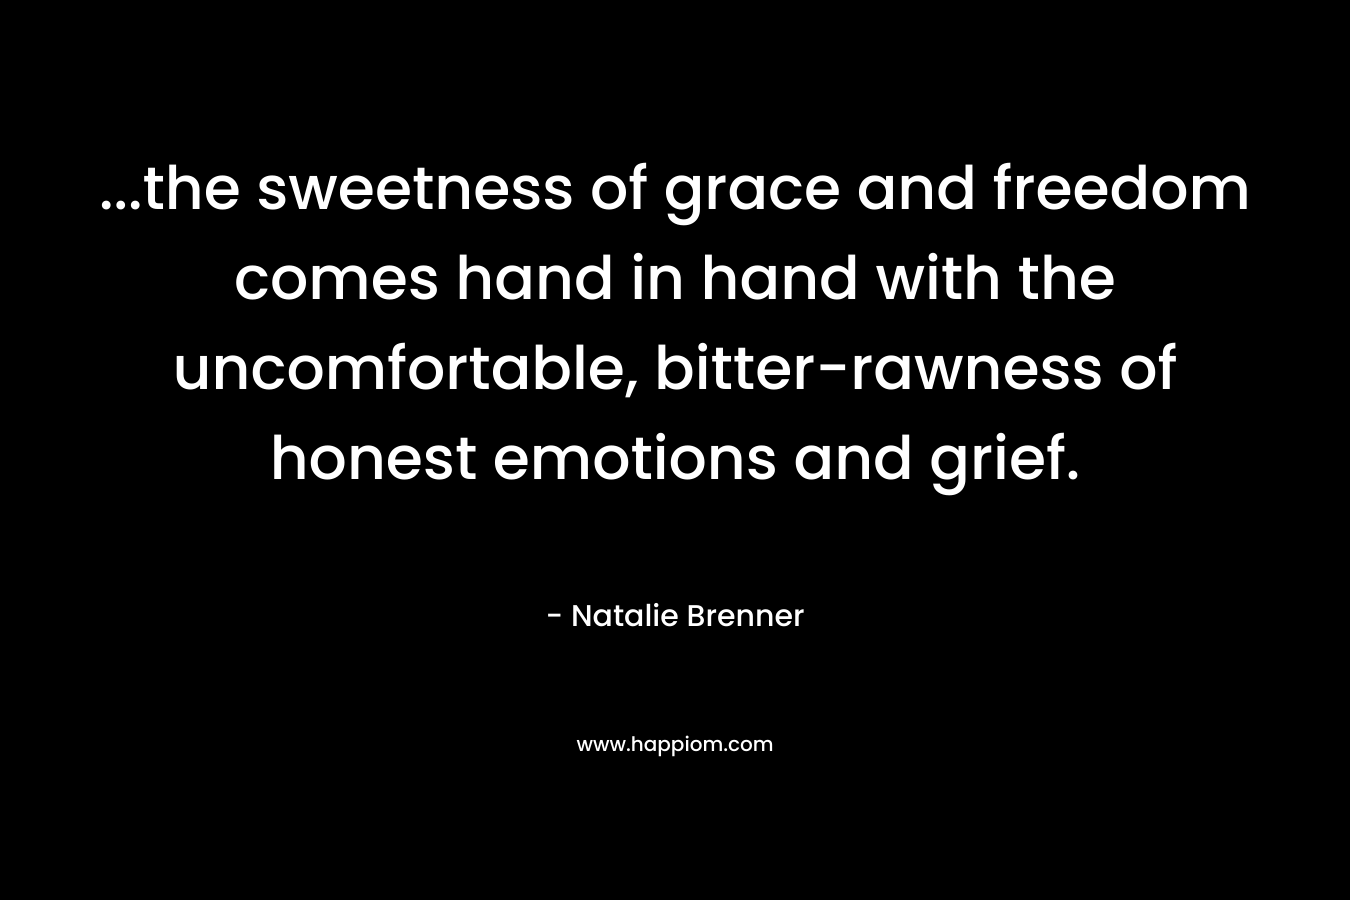 …the sweetness of grace and freedom comes hand in hand with the uncomfortable, bitter-rawness of honest emotions and grief. – Natalie Brenner